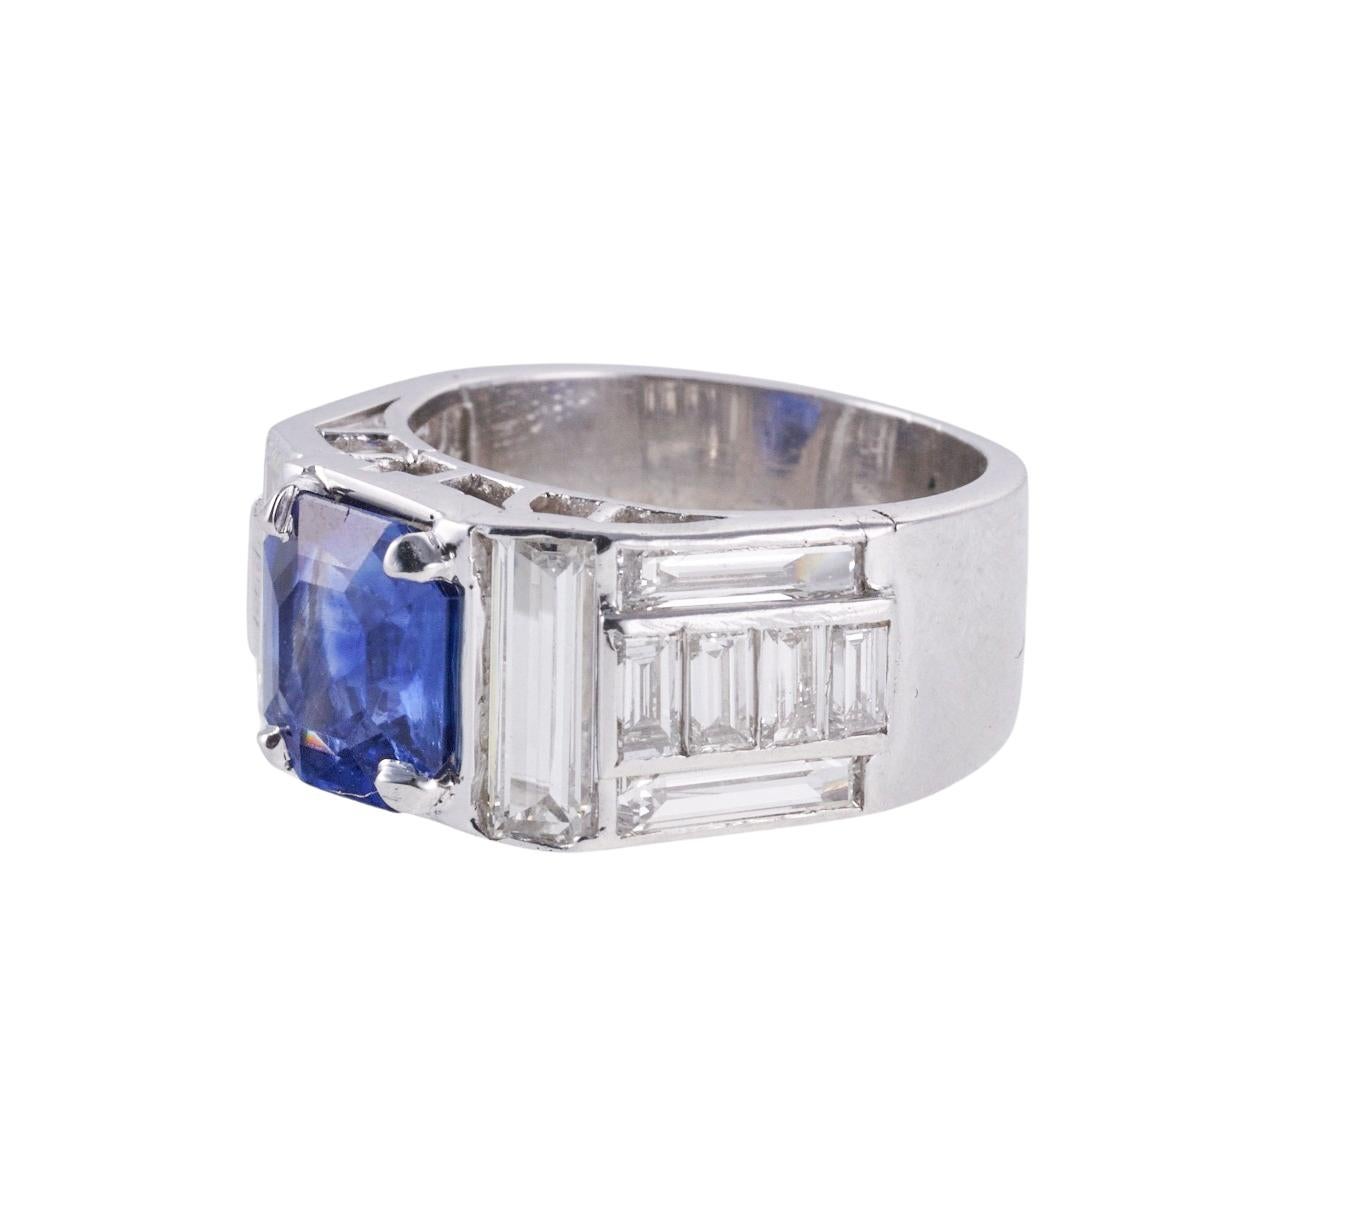 Impressive platinum ring setting, with center AGL certified 2.83ct no heat Kashmir sapphire. Stone measures  8.41 x 7.48 x 4.52mm. Surrounded with approx. 1.00ctw G/VS diamonds. Ring size 5, ring top is 9mm wide. Hallmarked with punchmark on the